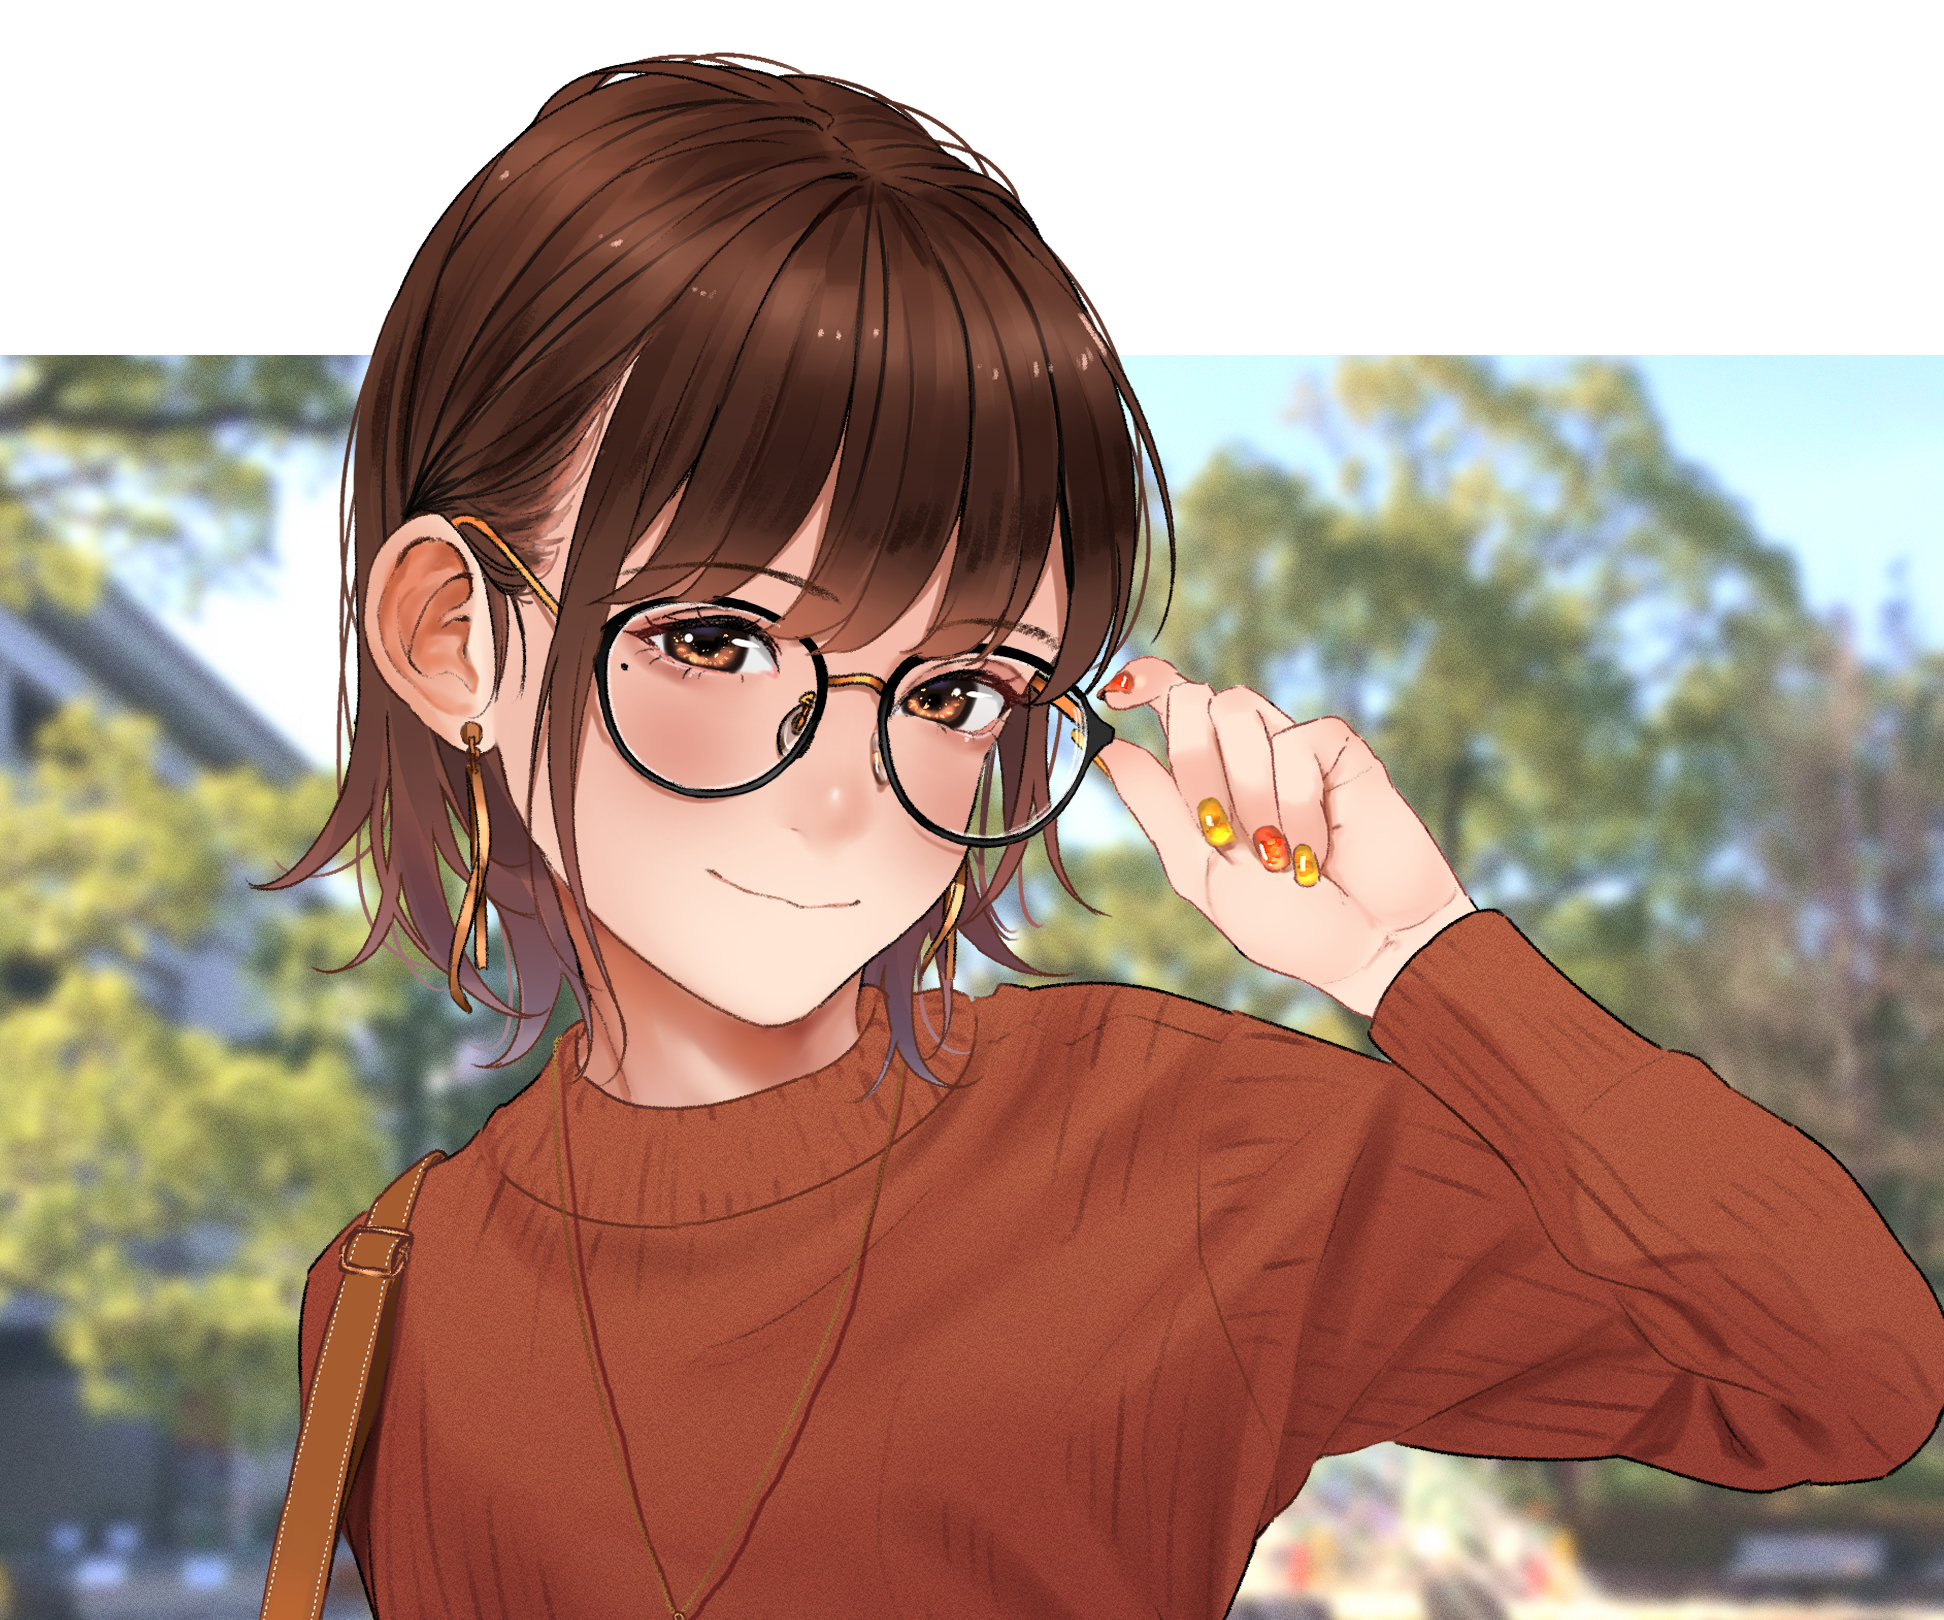 405898 anime anime girl animal ears original character glasses simple  background hd download 2120x3000  Rare Gallery HD Wallpapers